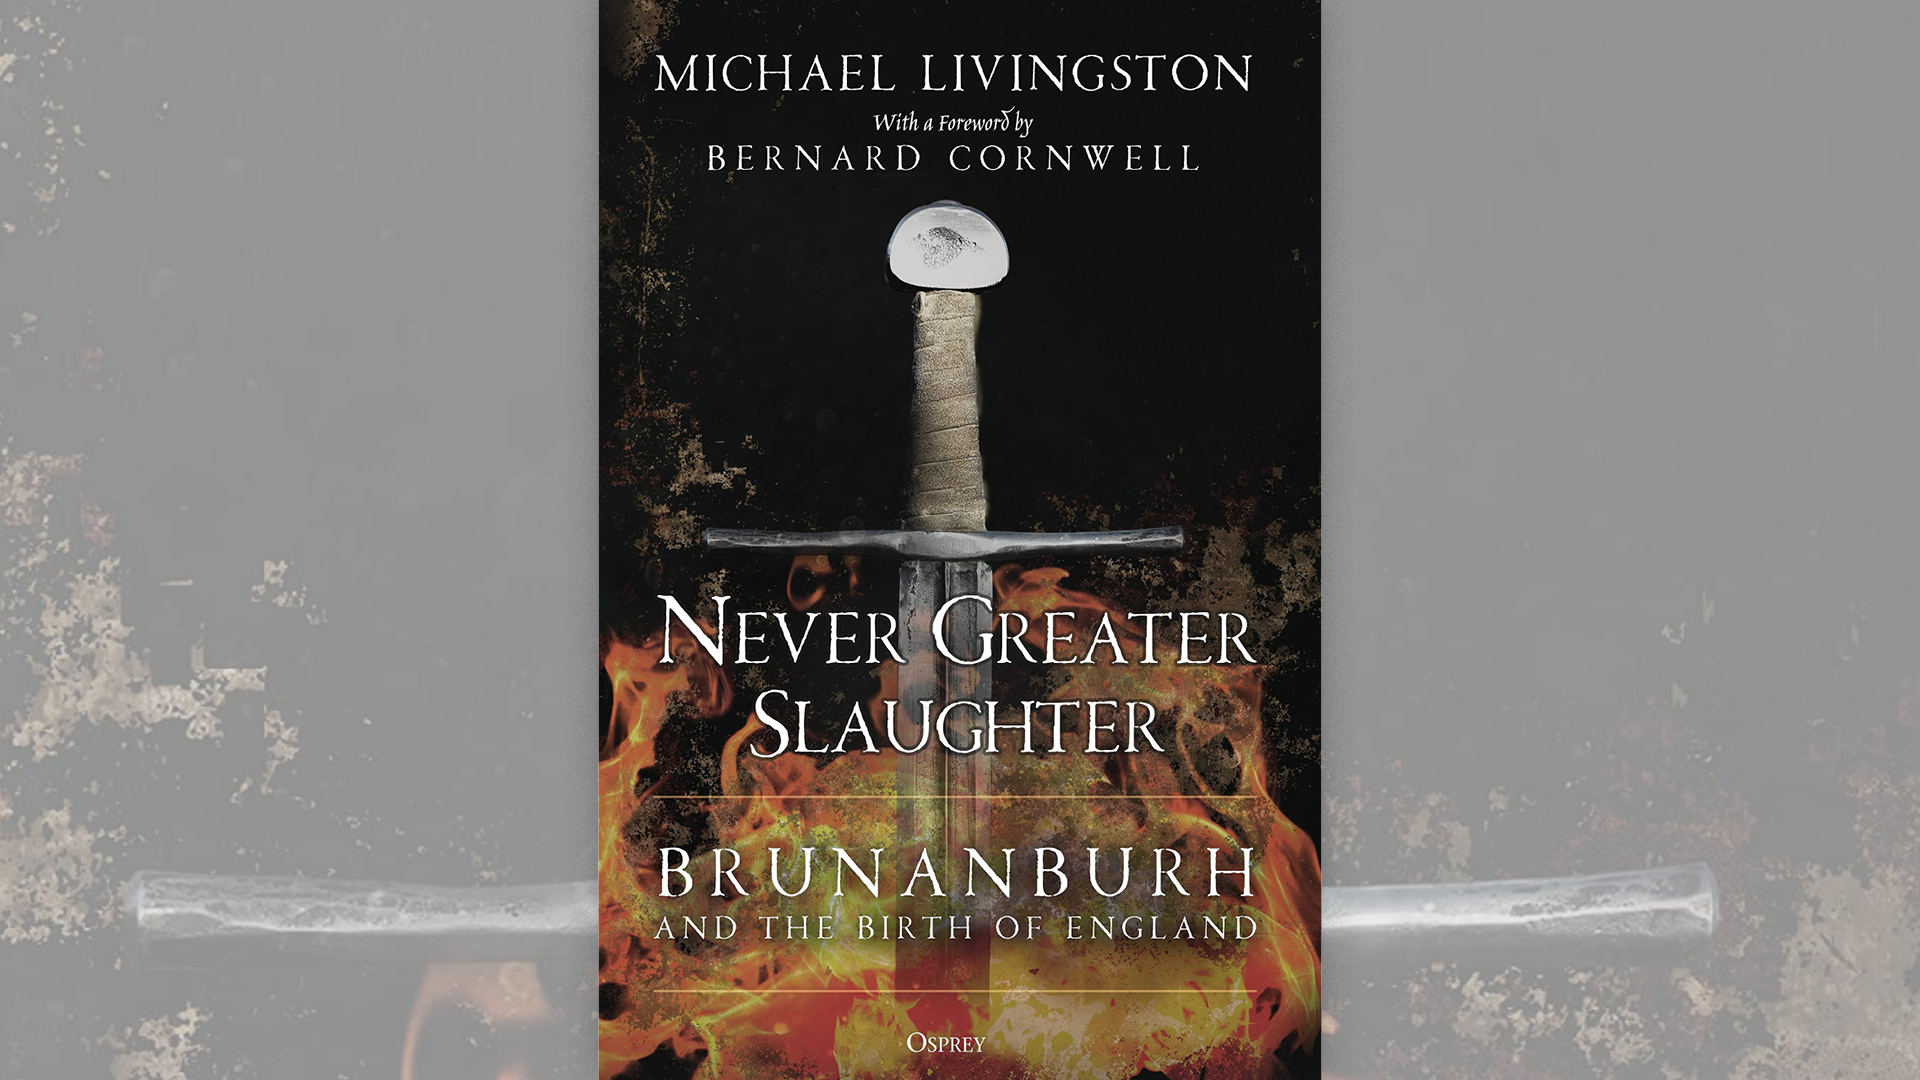 ‘Never Greater Slaughter’ Book Review: Brunanburh and the Birth of England